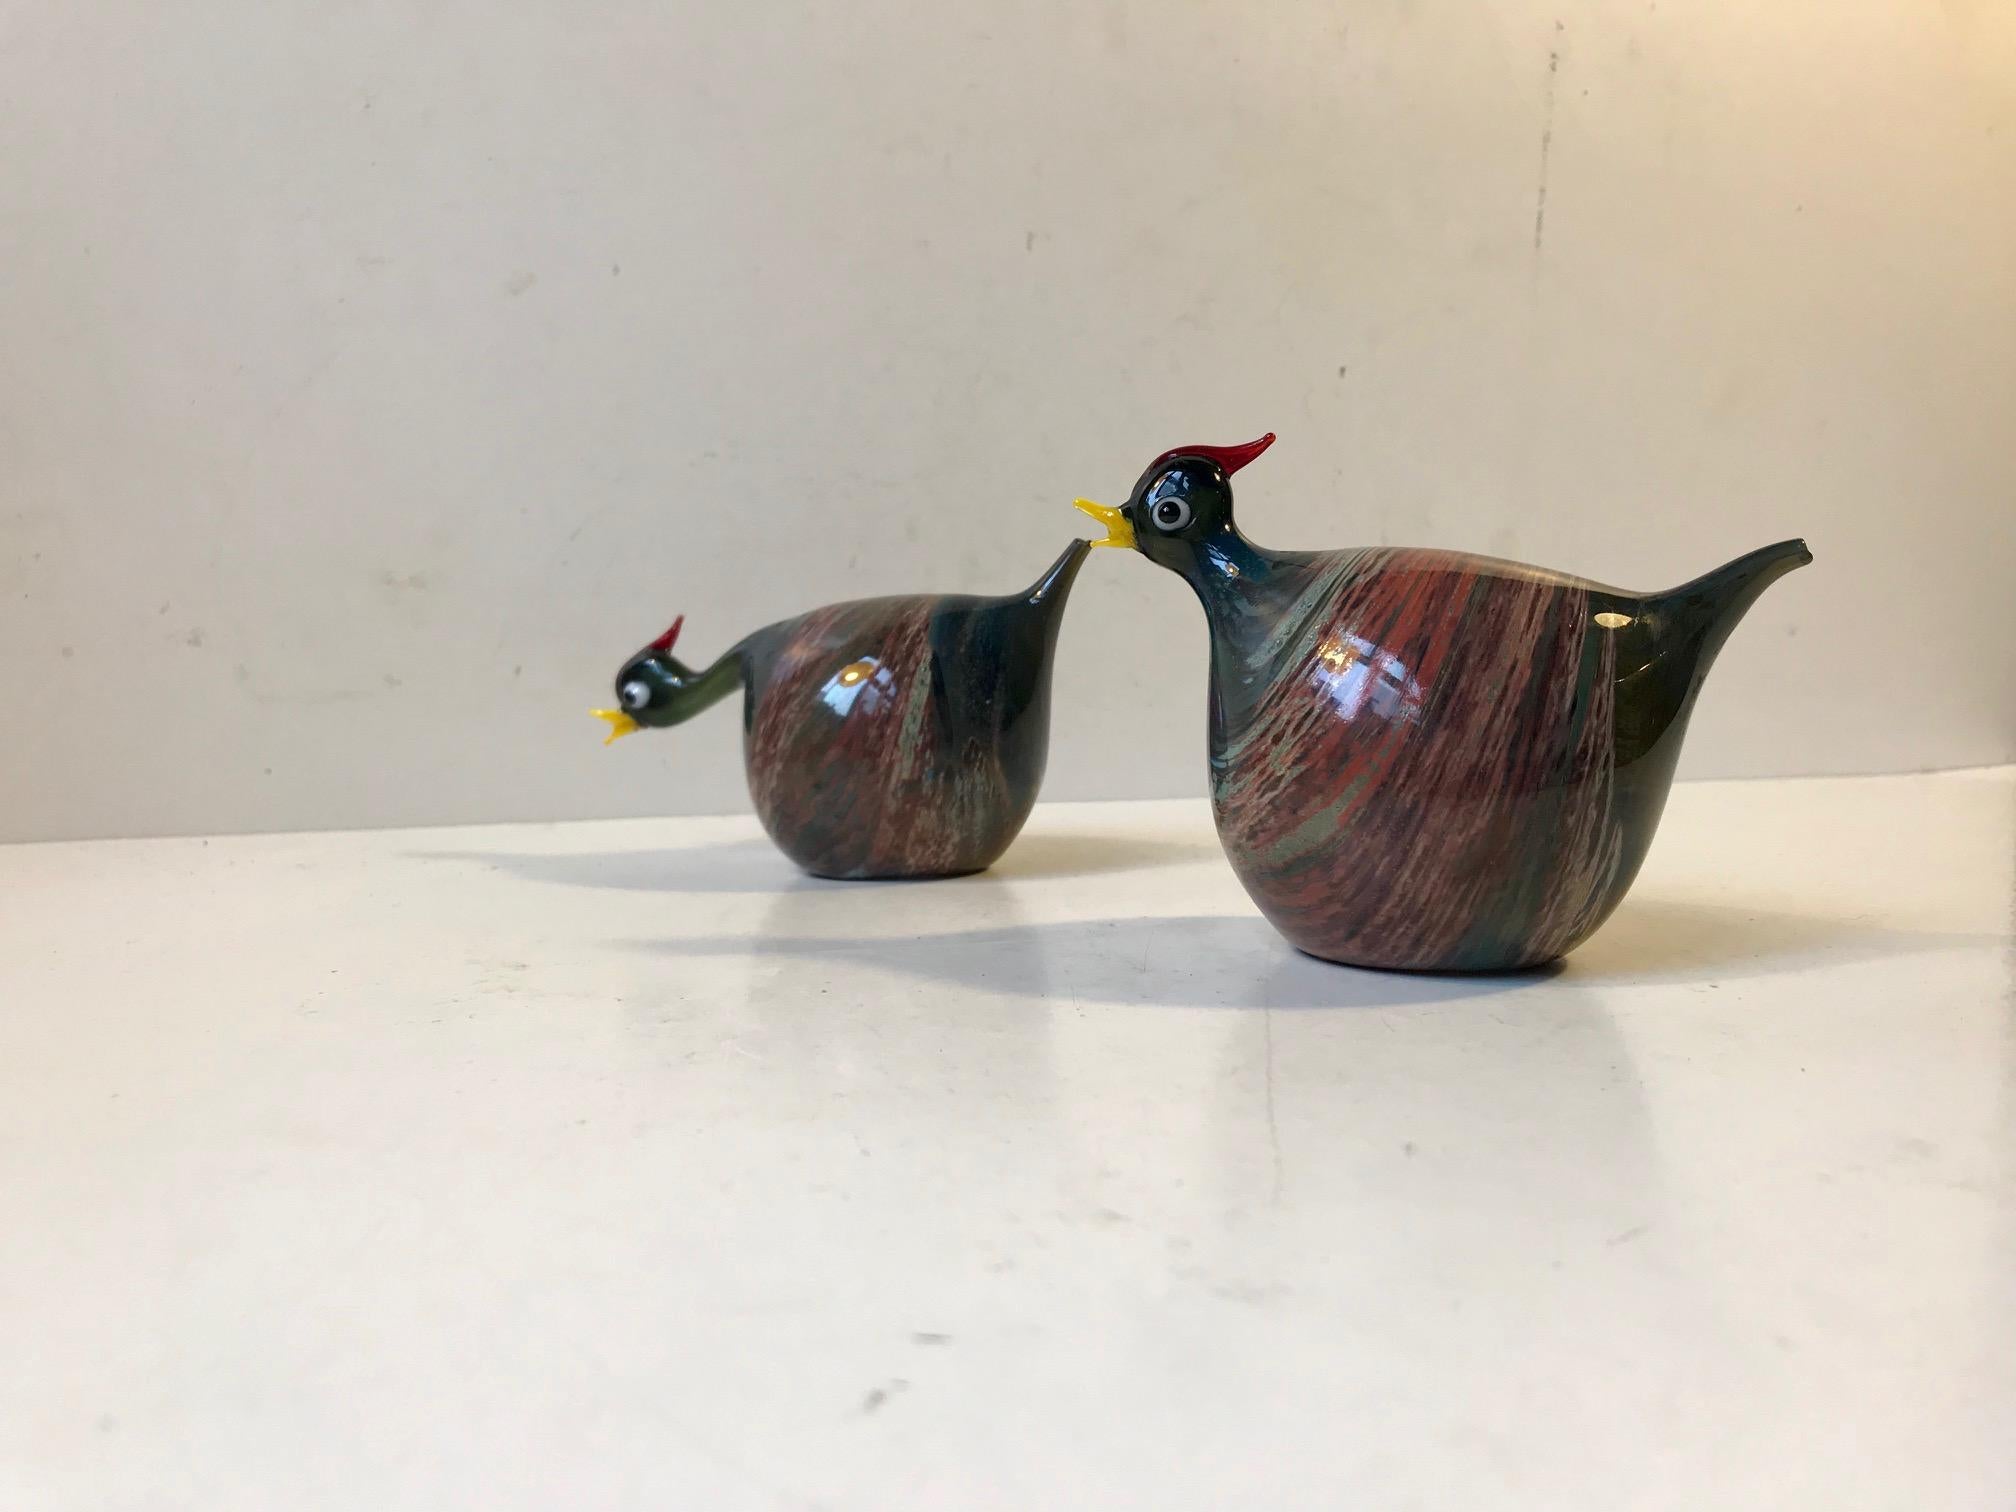 Decorative pair of hen figurines in marbled multicolored glass. Hand blown and finished by the founders of Danish glass art husband and wife John and Ulrika Poulsen.